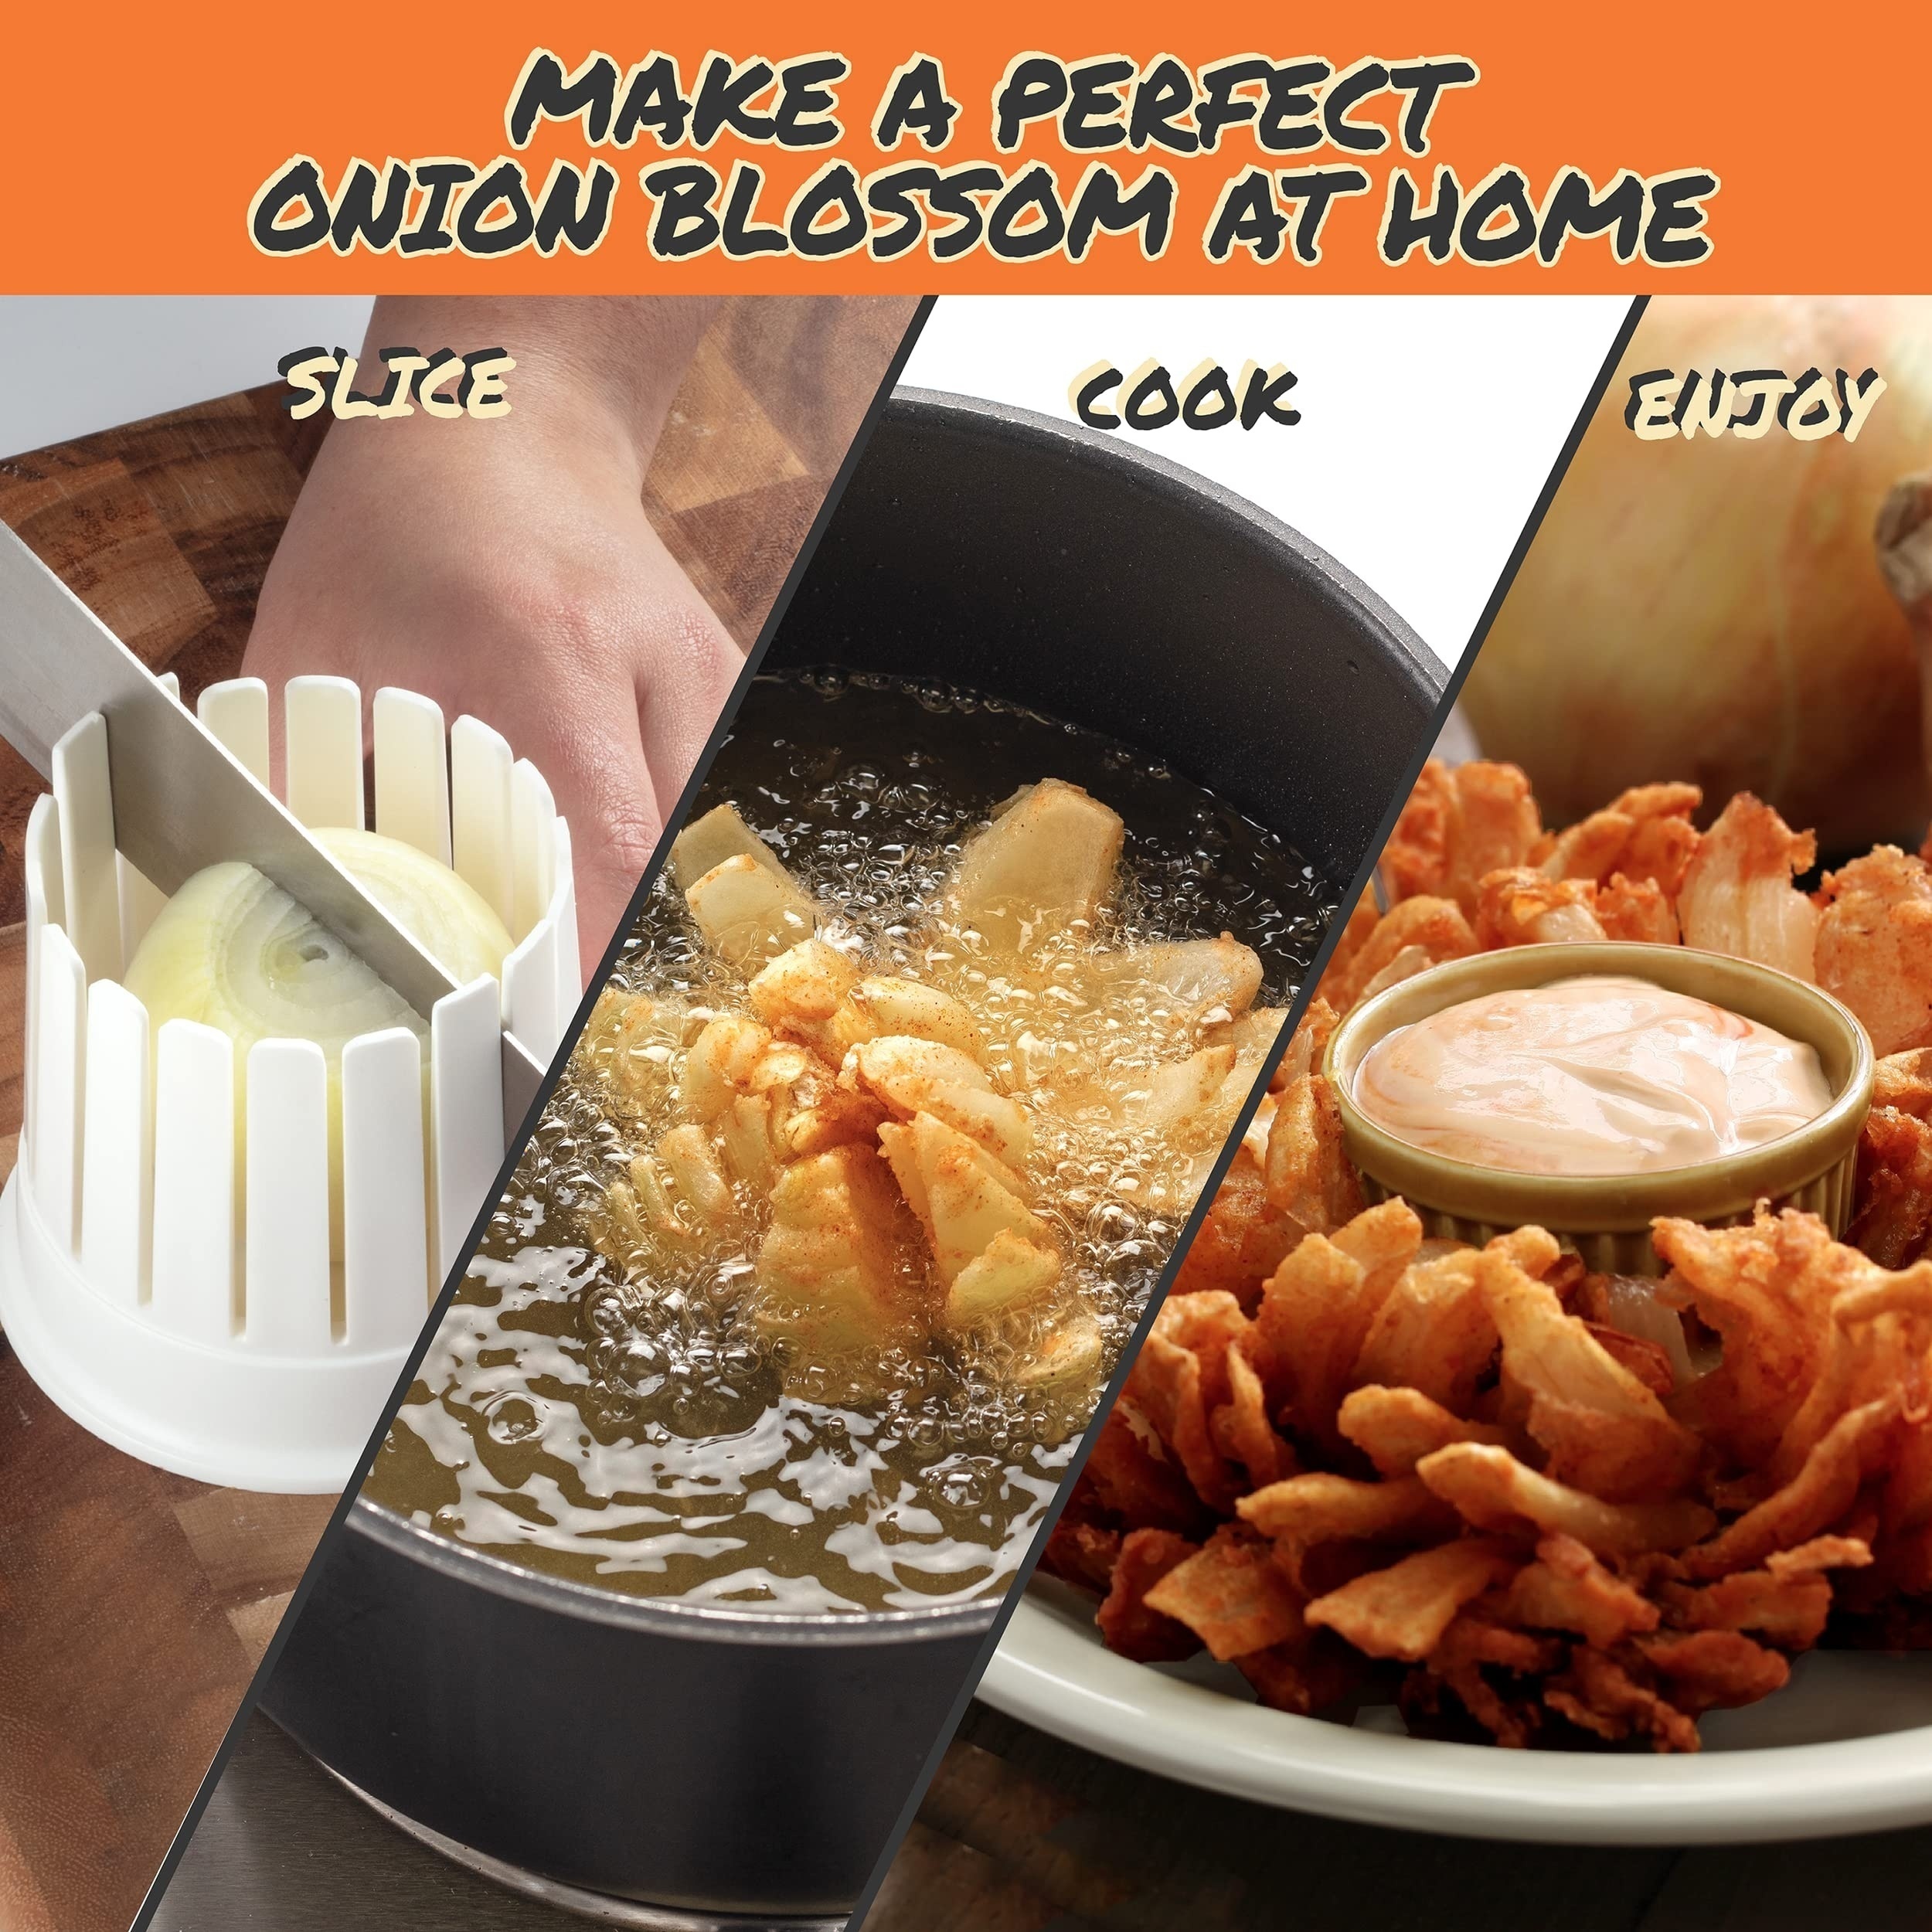 (Very Good) Great American Steakhouse Onion Machine Blooming Onion Maker  Slicer